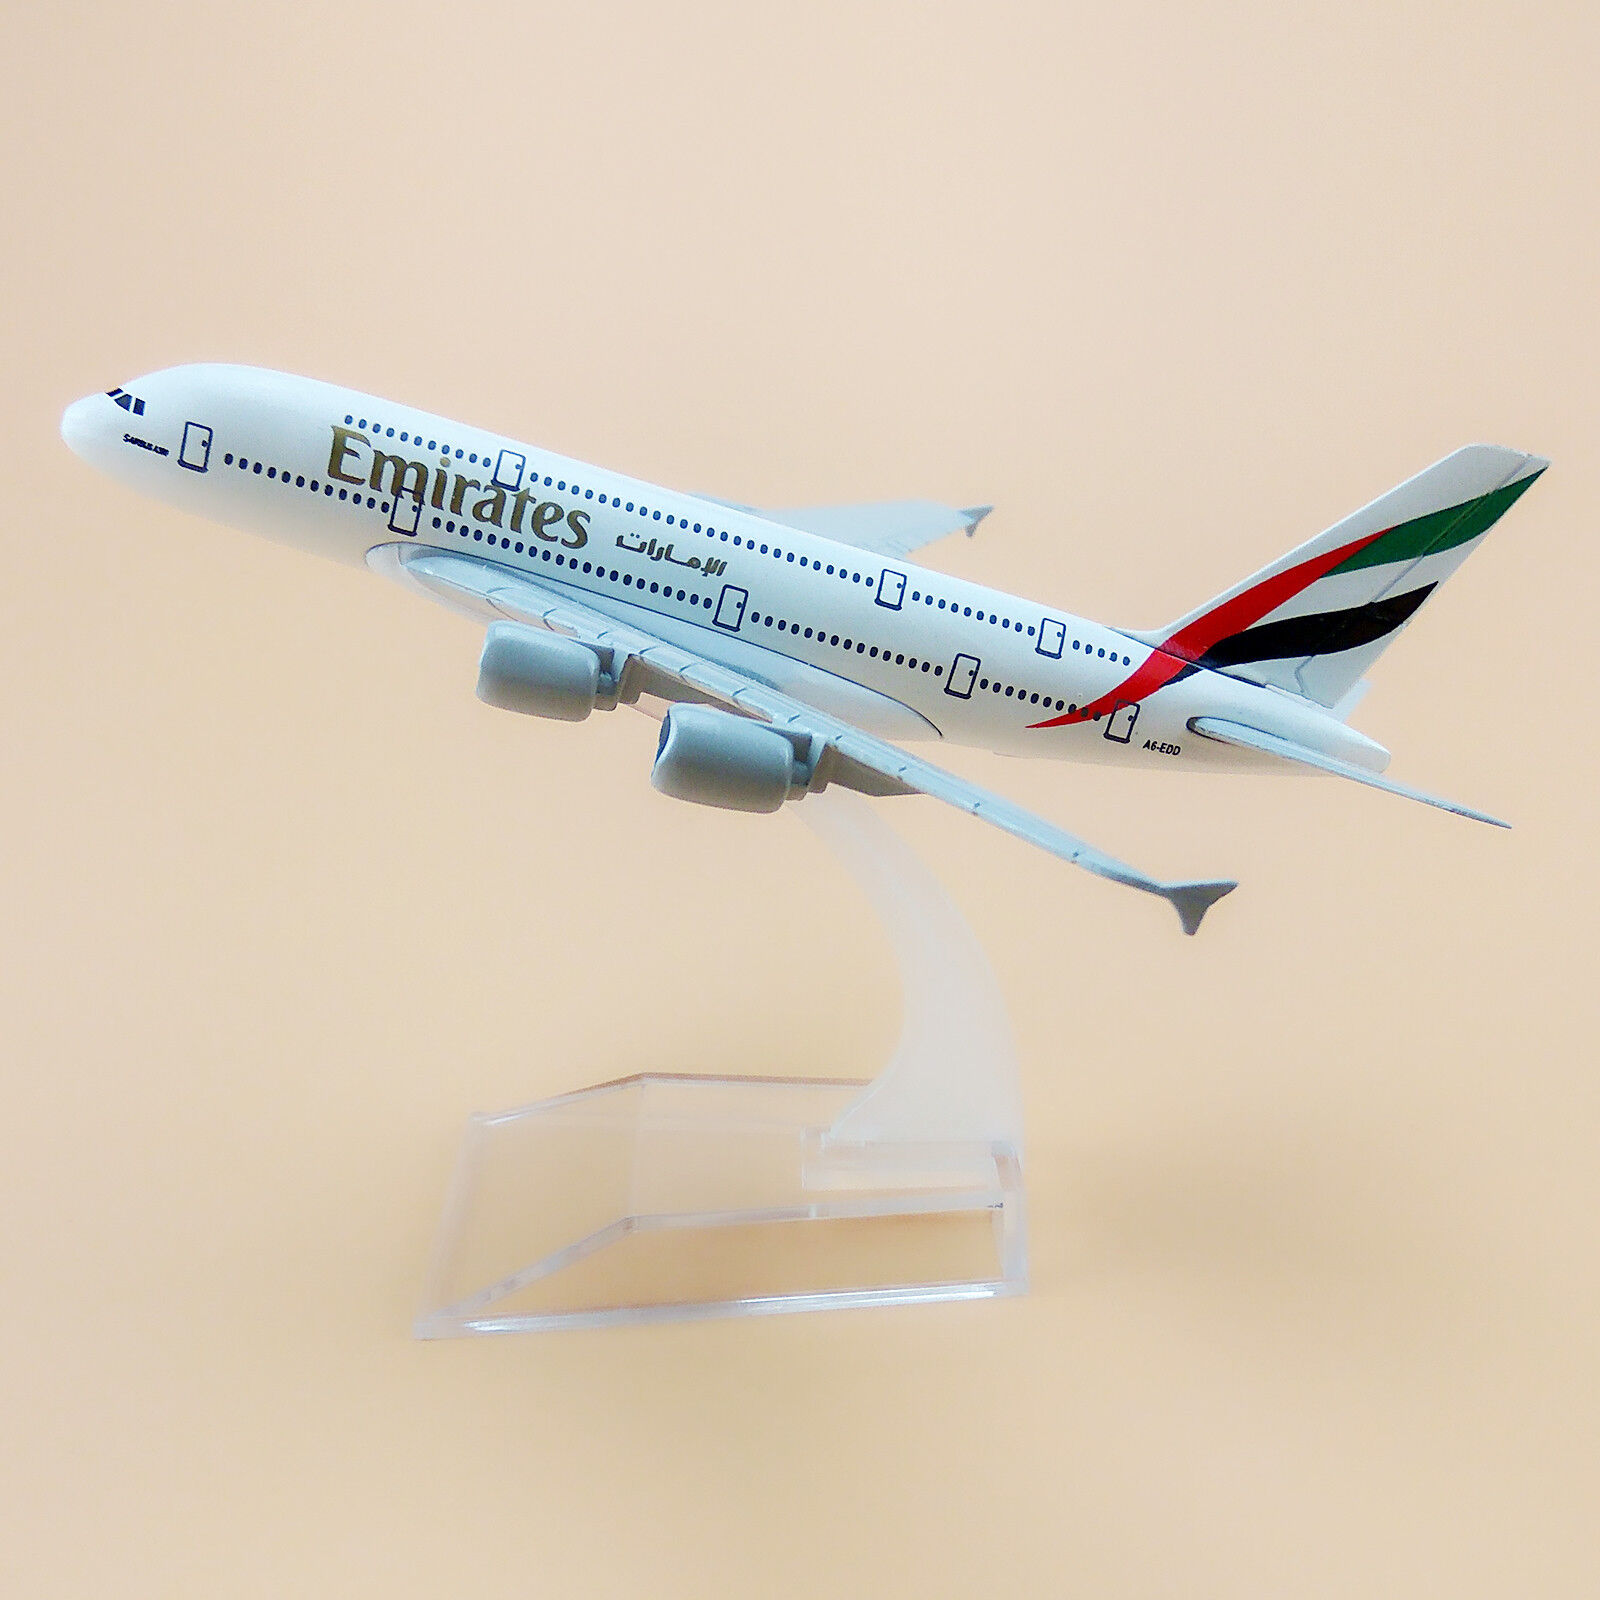 16cm Airplane Model Plane Air Emirates Airlines Airbus A380 Aircraft Model Alloy